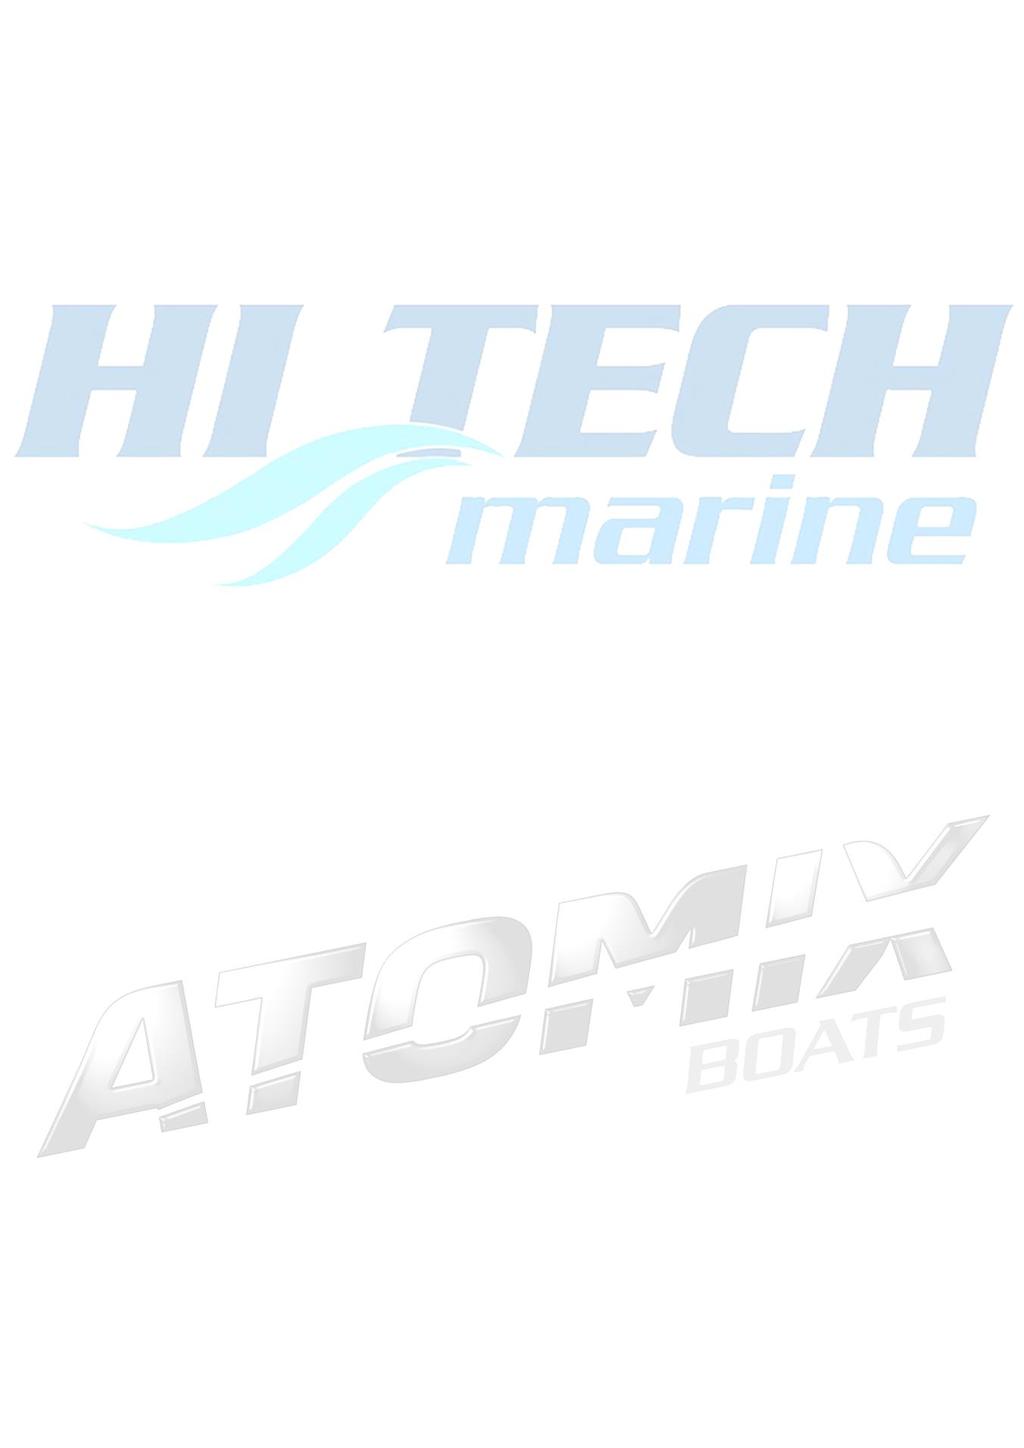 WHAT OWNER MUST DO TO CLAIM THIS LIMITED WARRANTY To initiate a warranty claim, it is the responsibility of the owner to contact an authorized Hitech Marine imported Atomix Boats dealer immediately